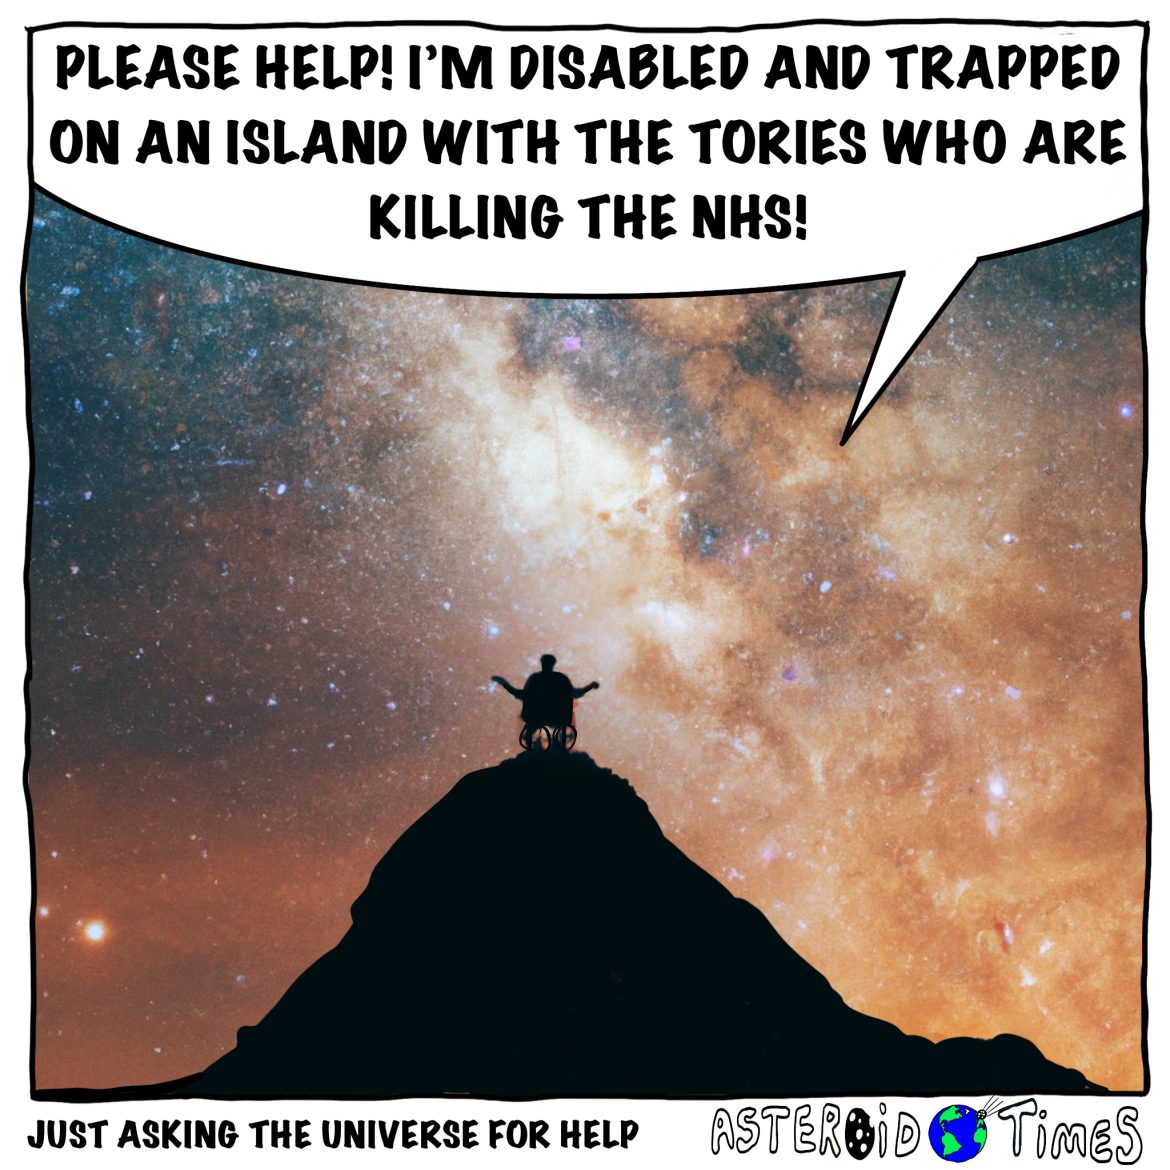 Just asking the universe for help